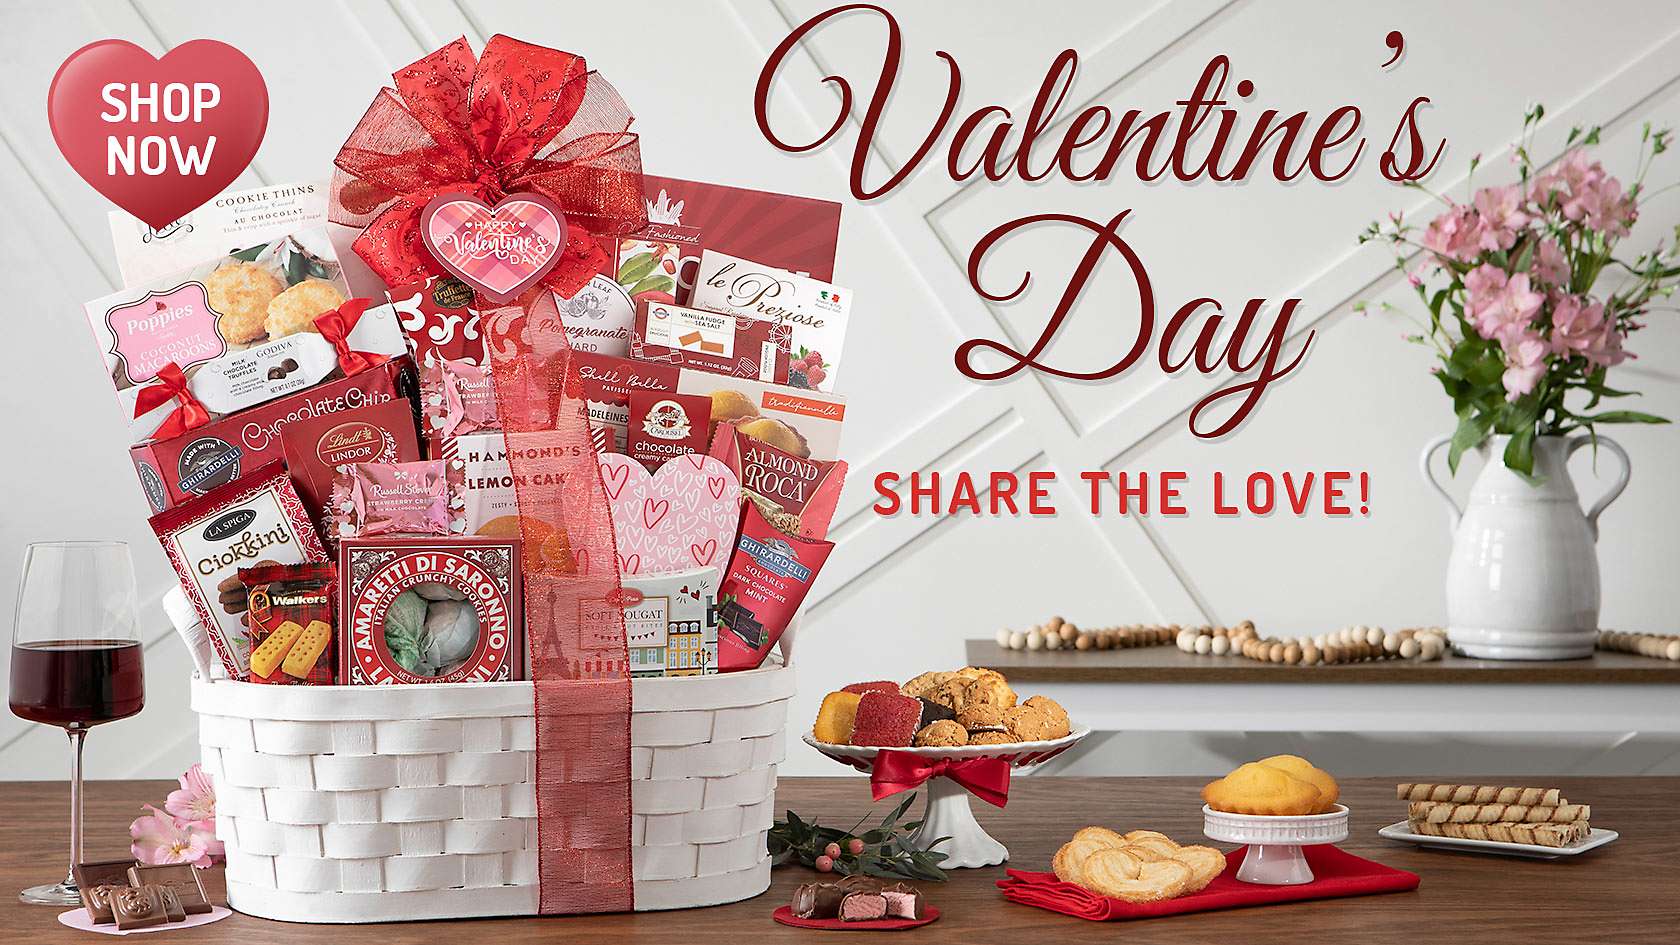 Valentine's Day - share the love